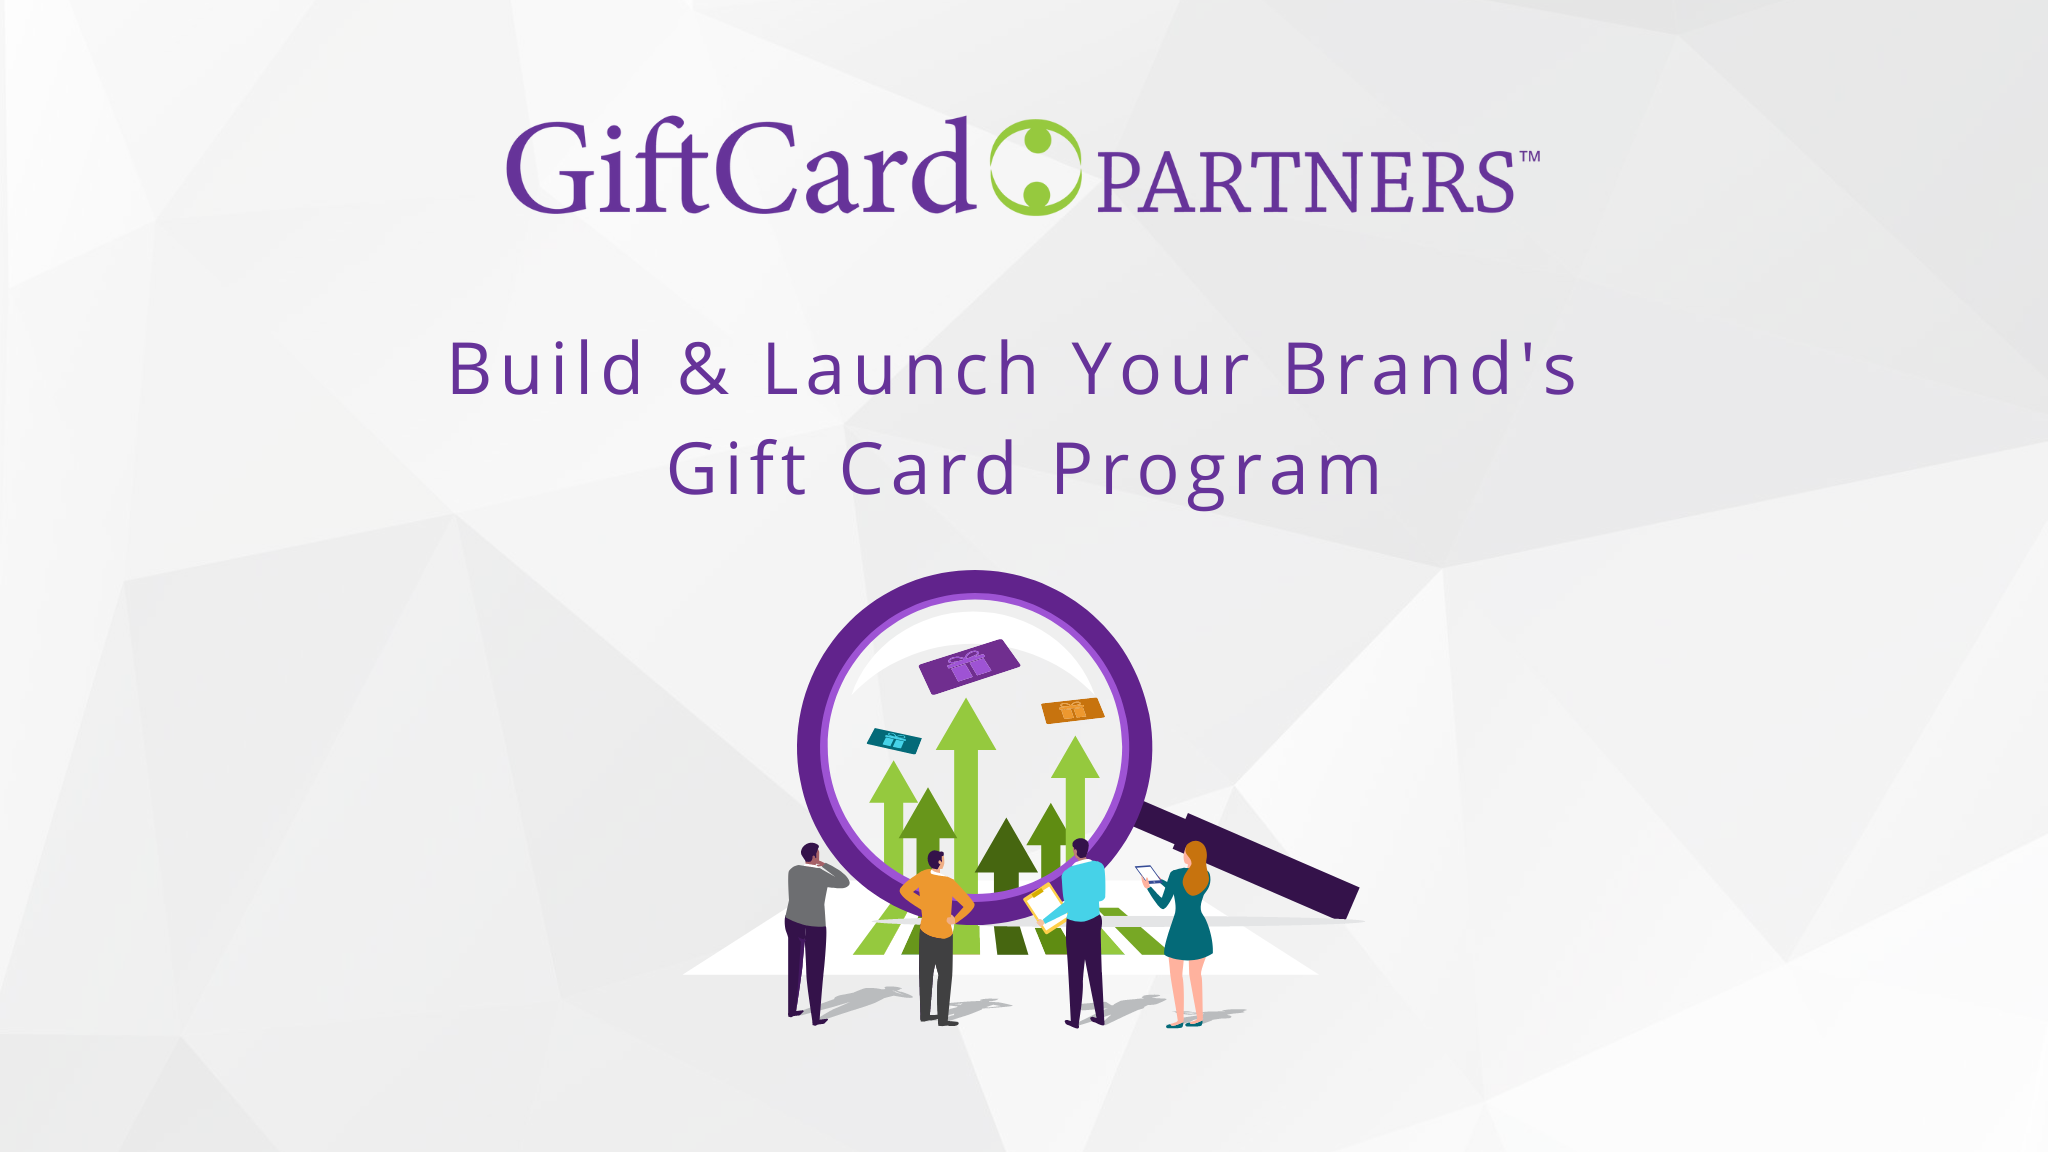 Build & Launch Your Brand's Gift Card Program with GiftCard Partners